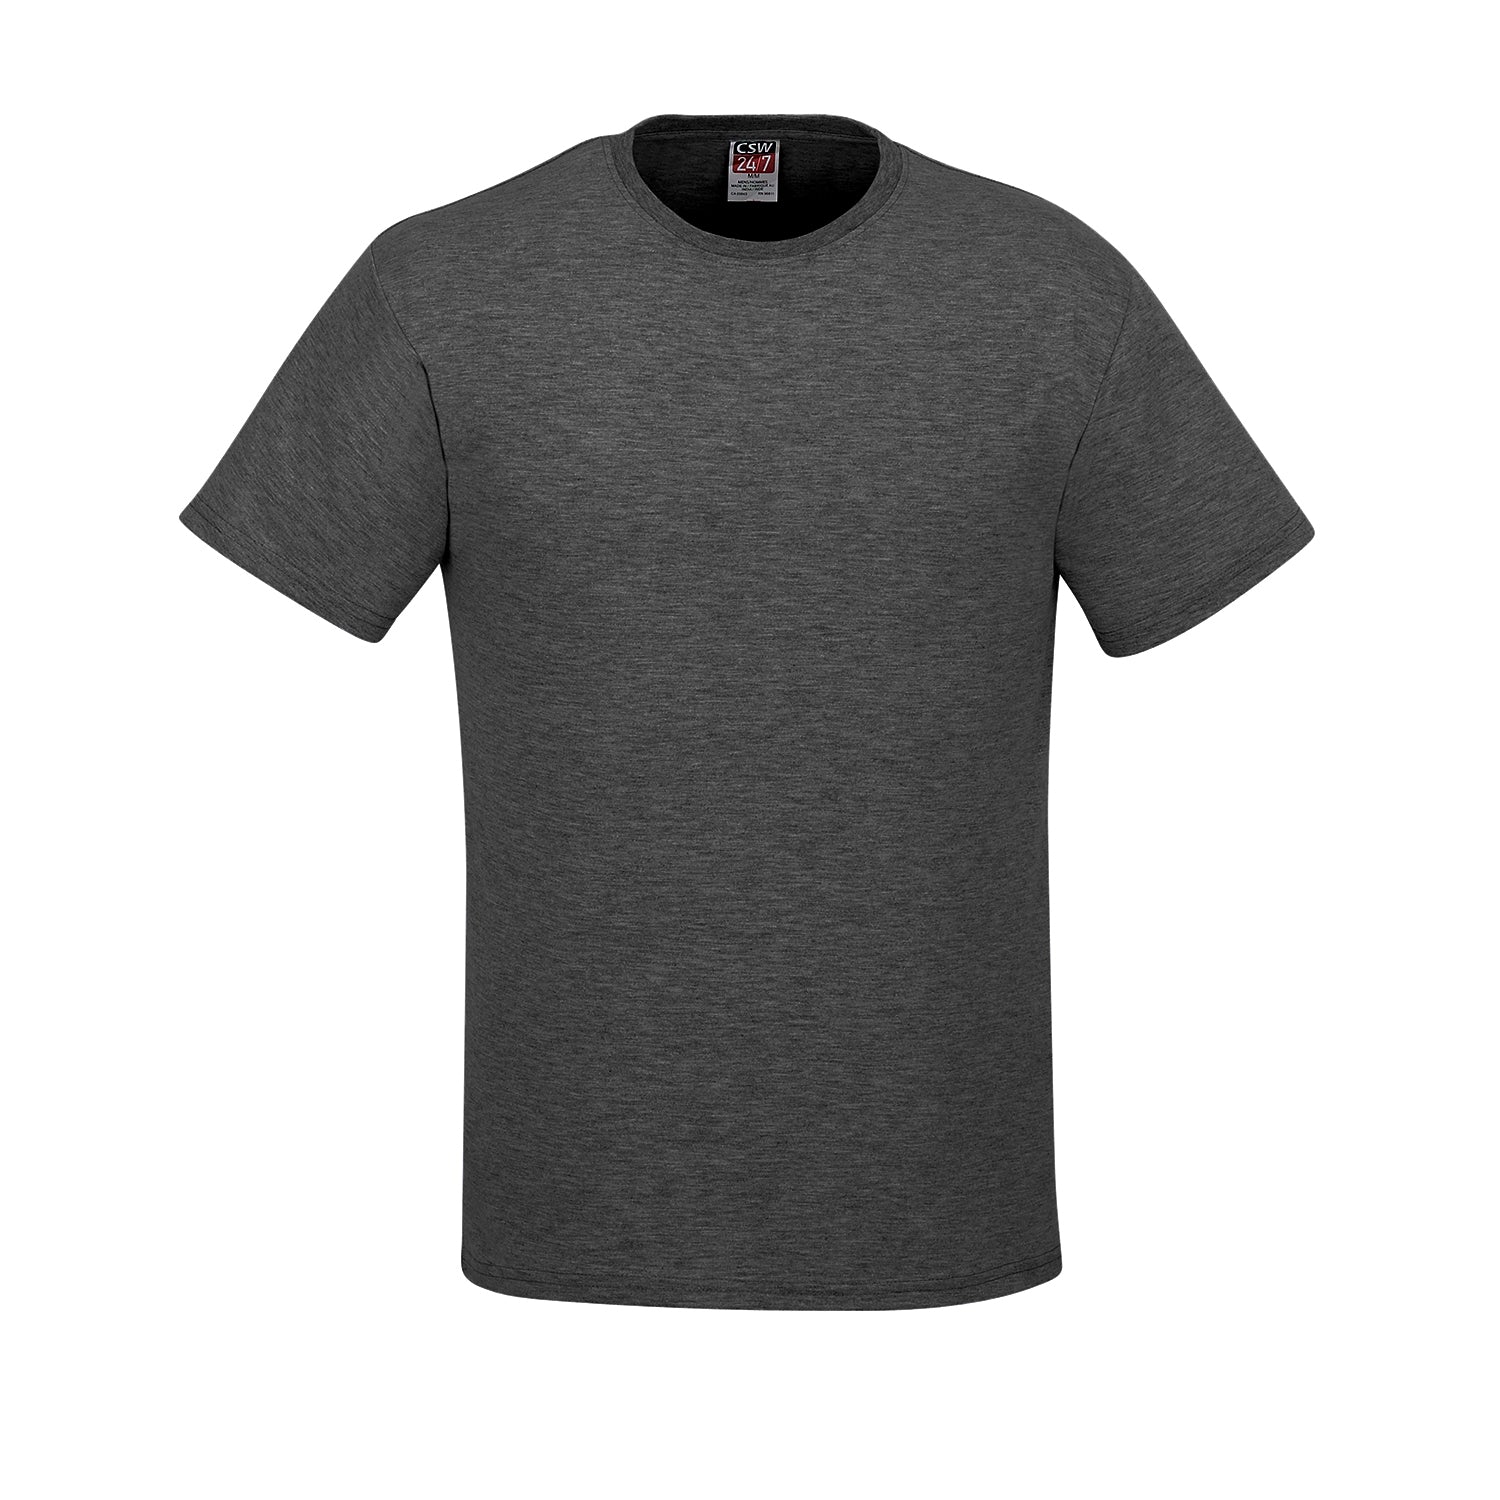 100% Cotton T-Shirt Spin Ink